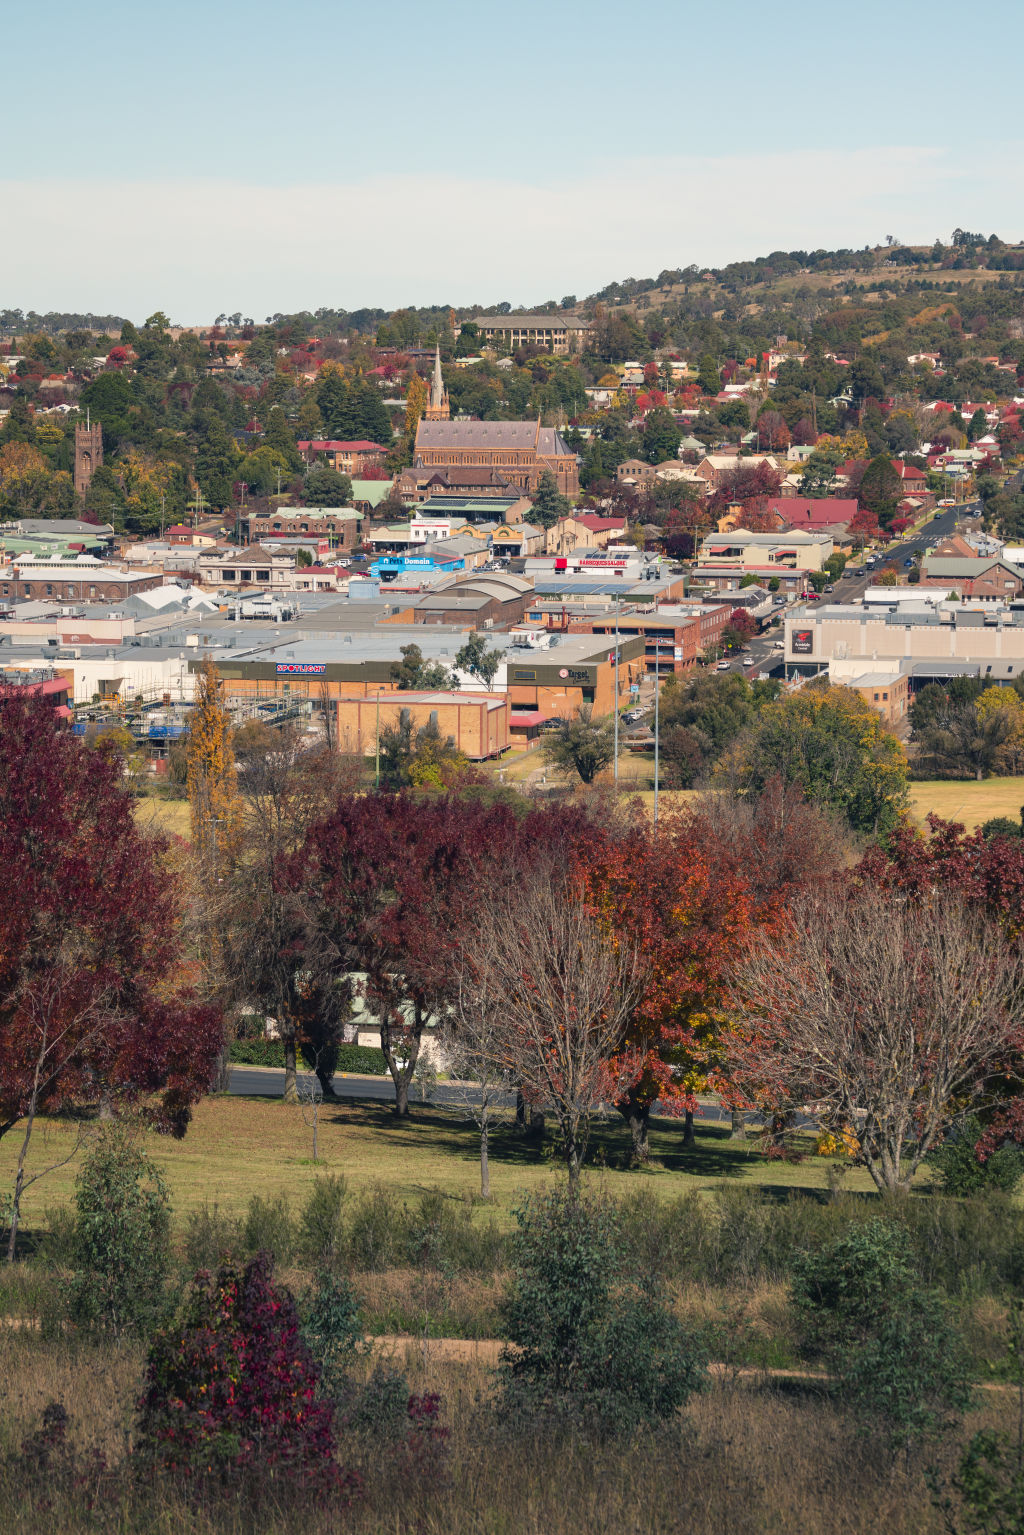 Armidale: The picturesque regional city luring out-of-town home buyers